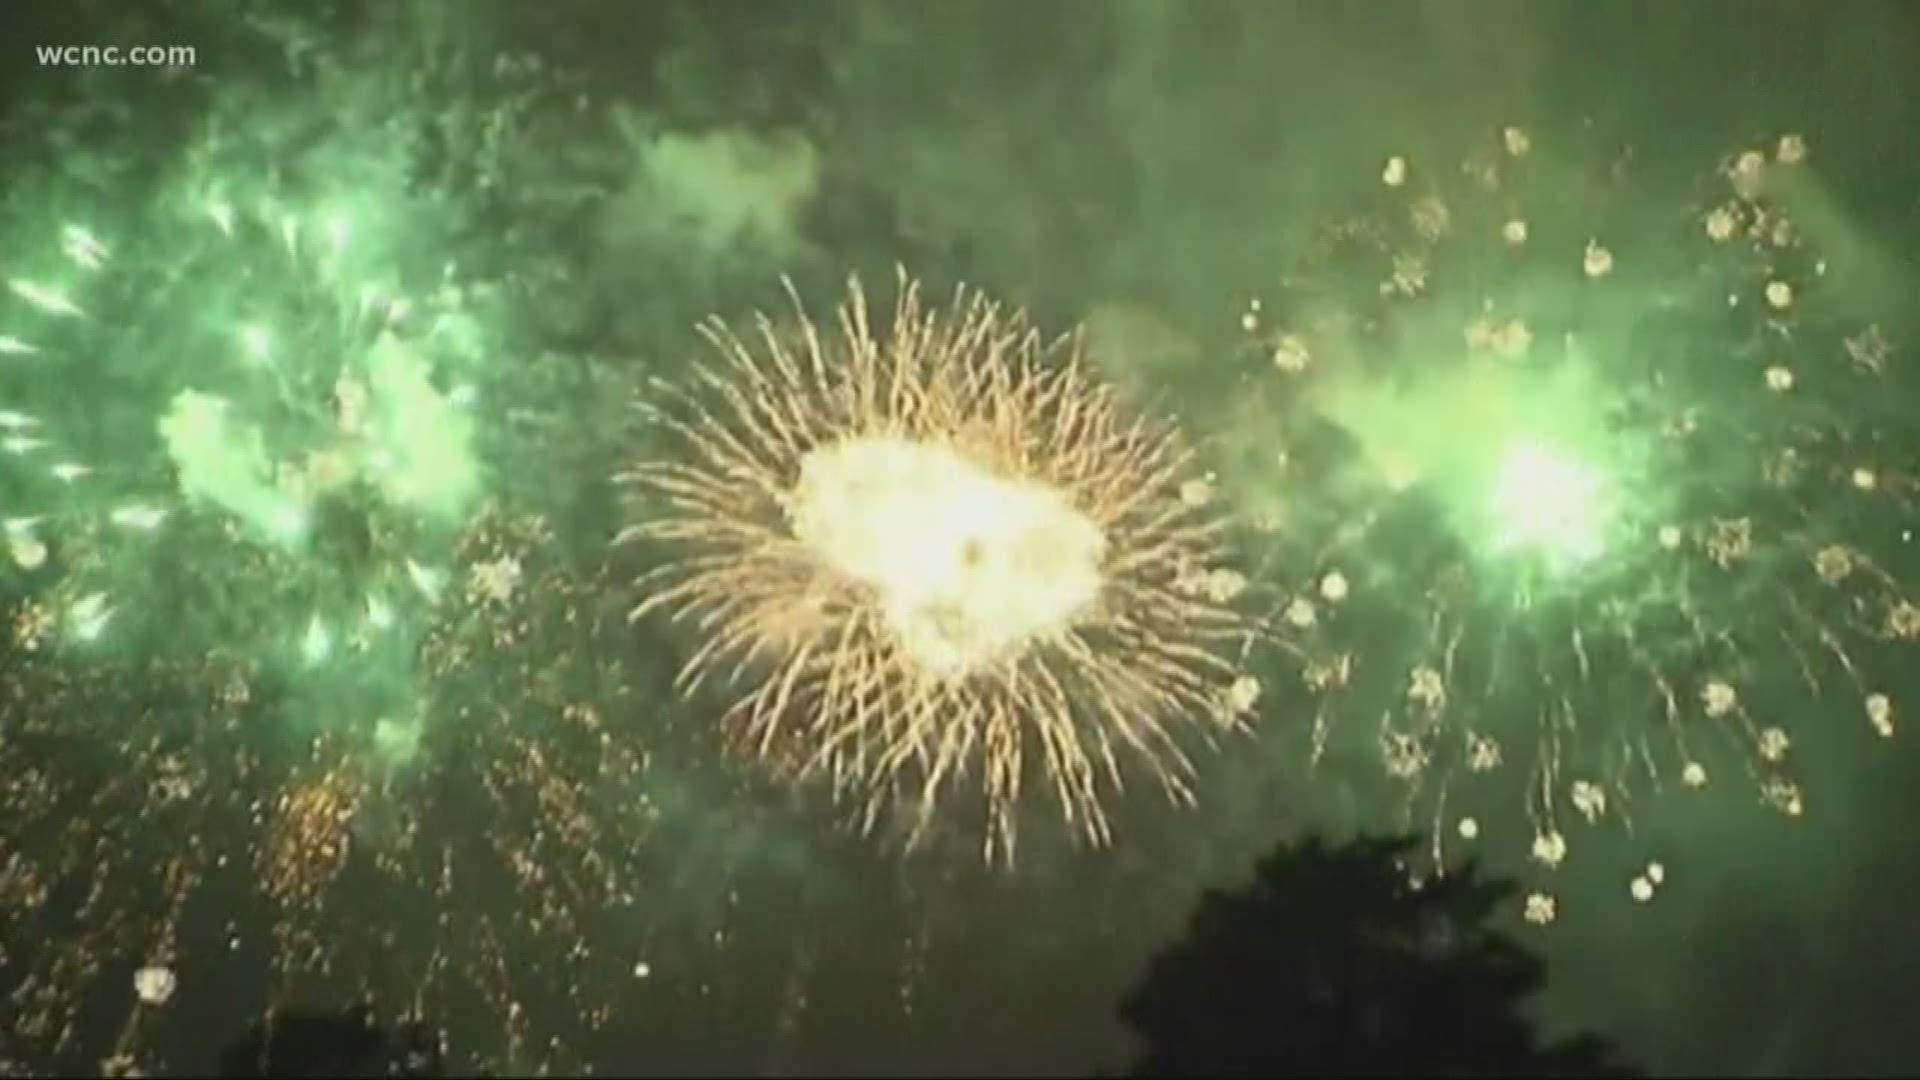 While fireworks are a popular method of celebrating the new year, they can often be confused for gunshots because of the loud noise.